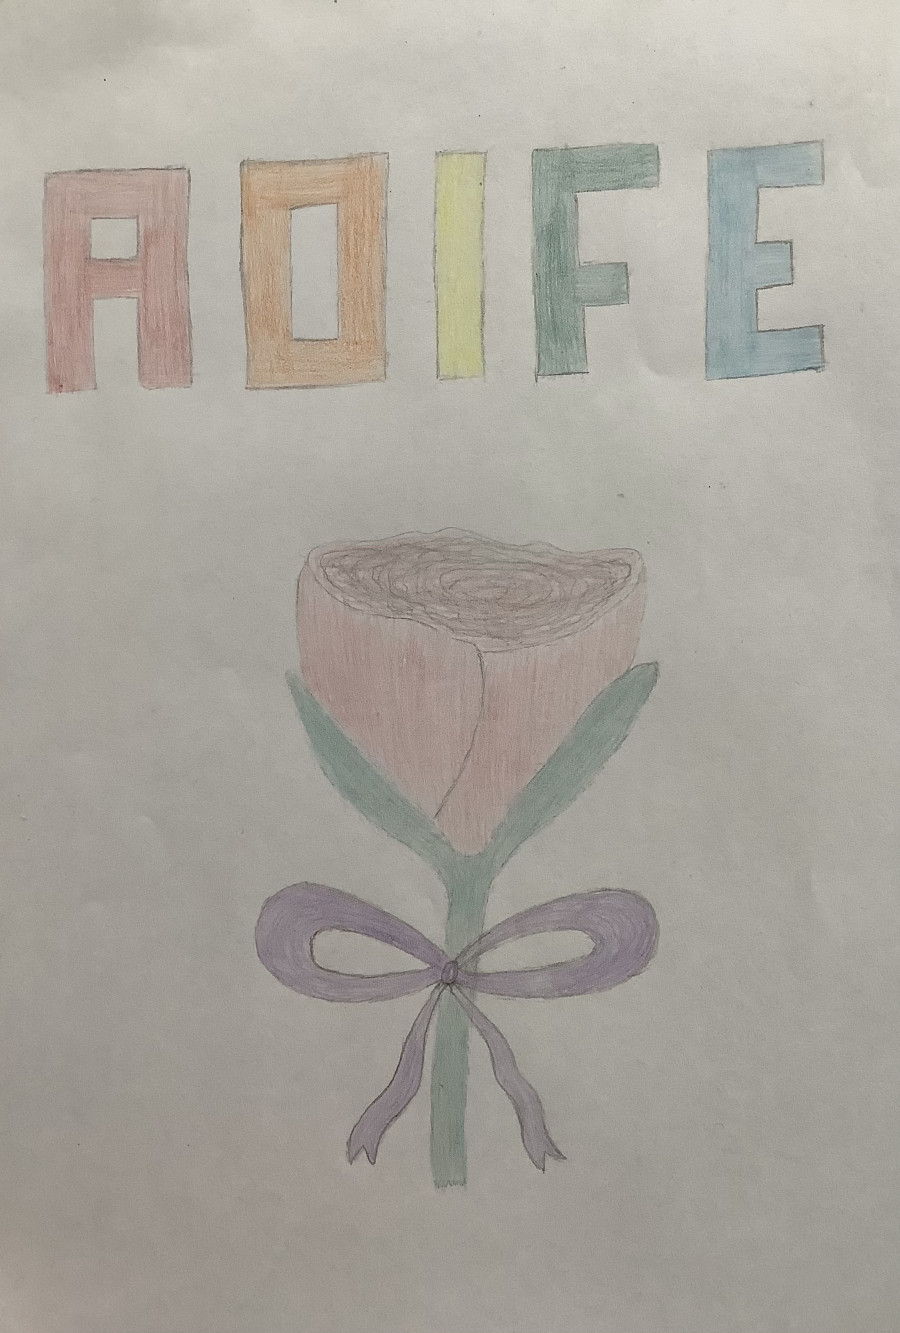 'A Flower of Hope' by Aoife (10) from Meath